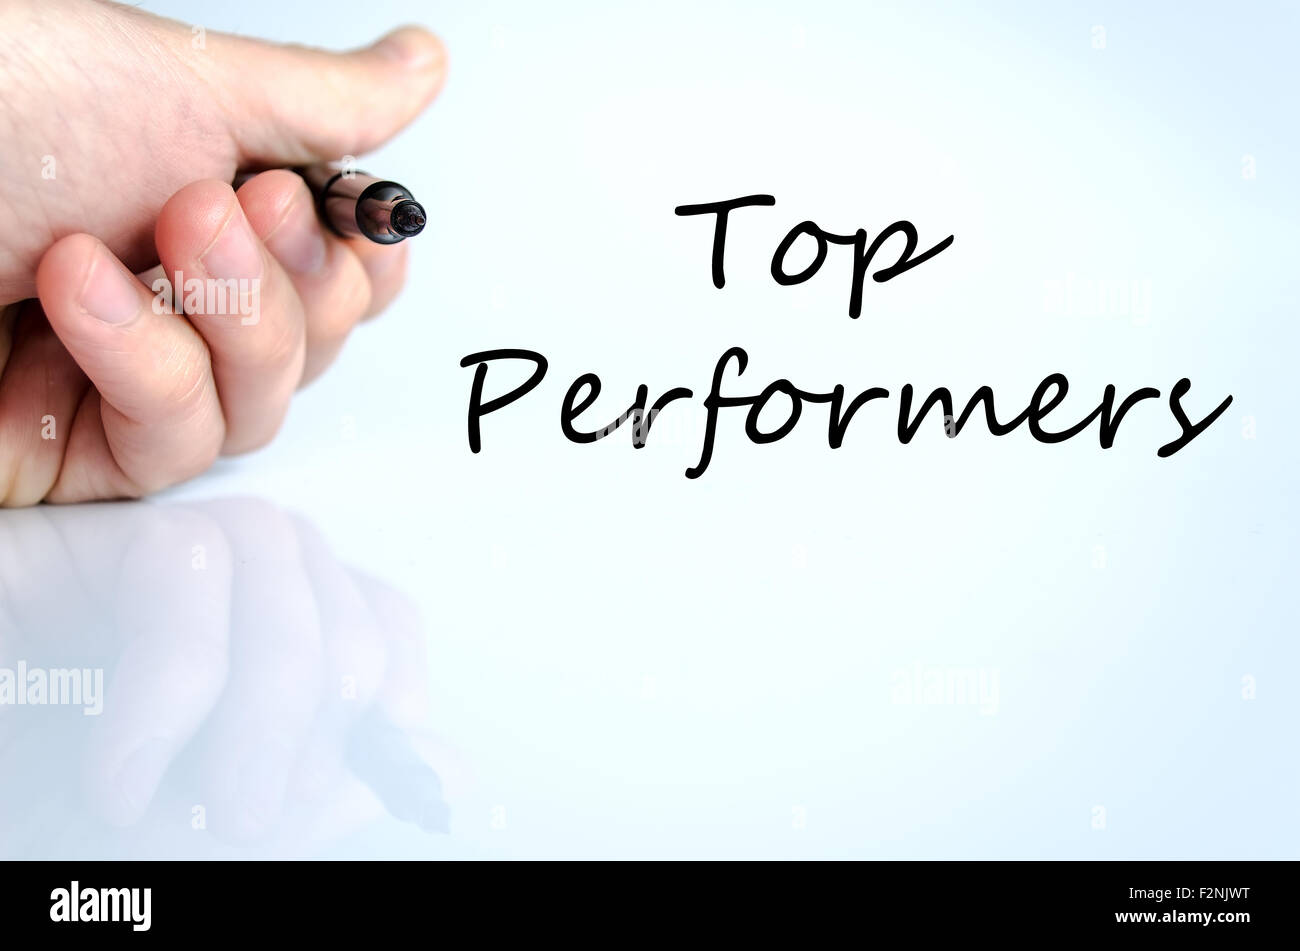 Top performers text concept isolated over white background Stock Photo